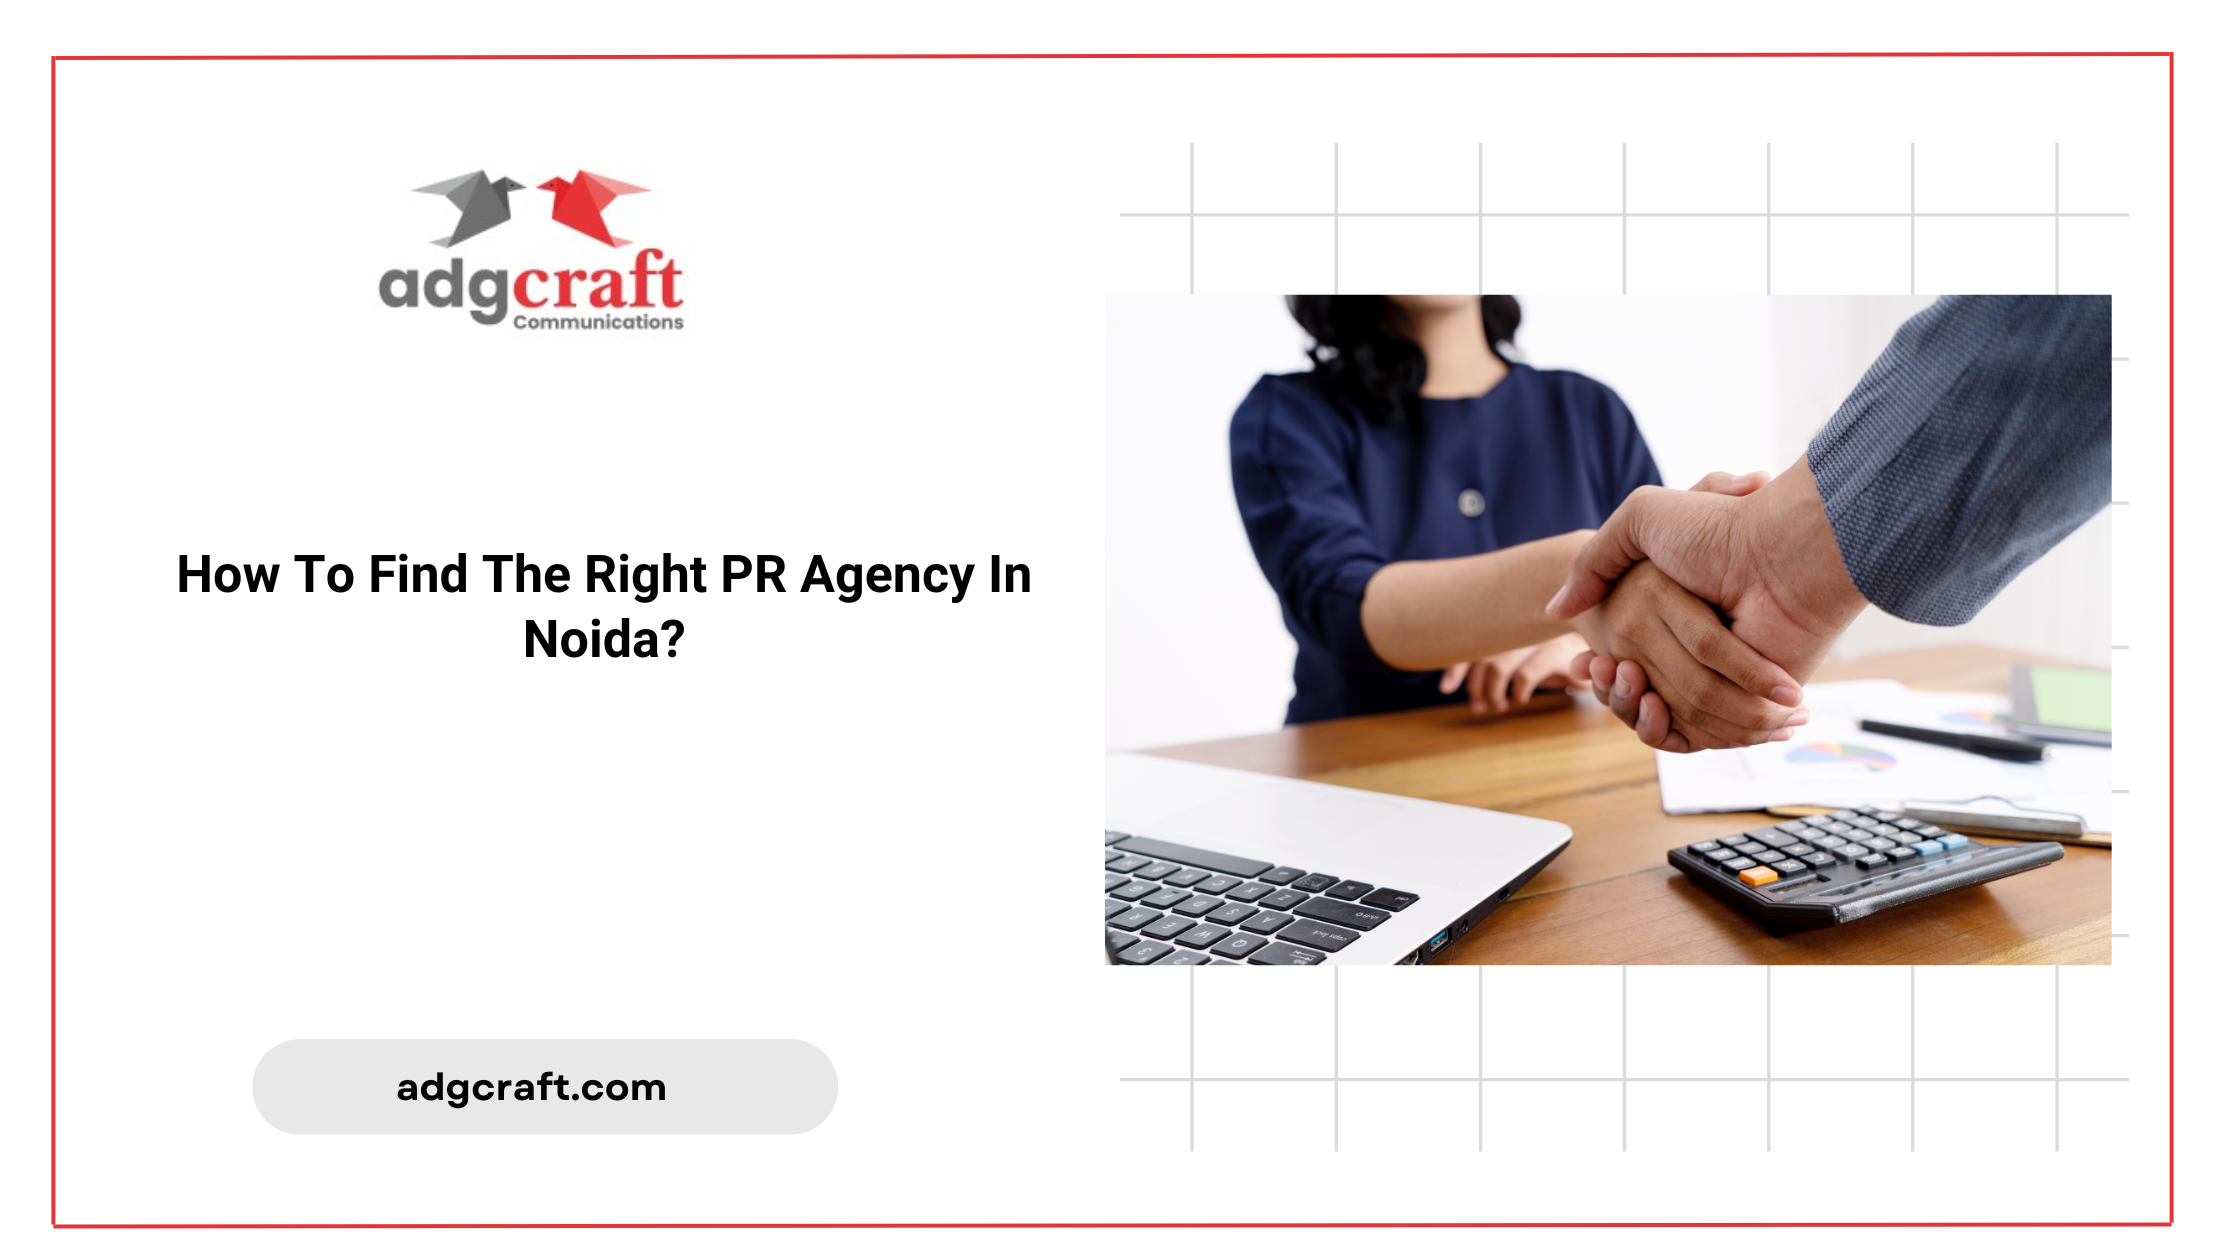 Find the right PR agency in Noida